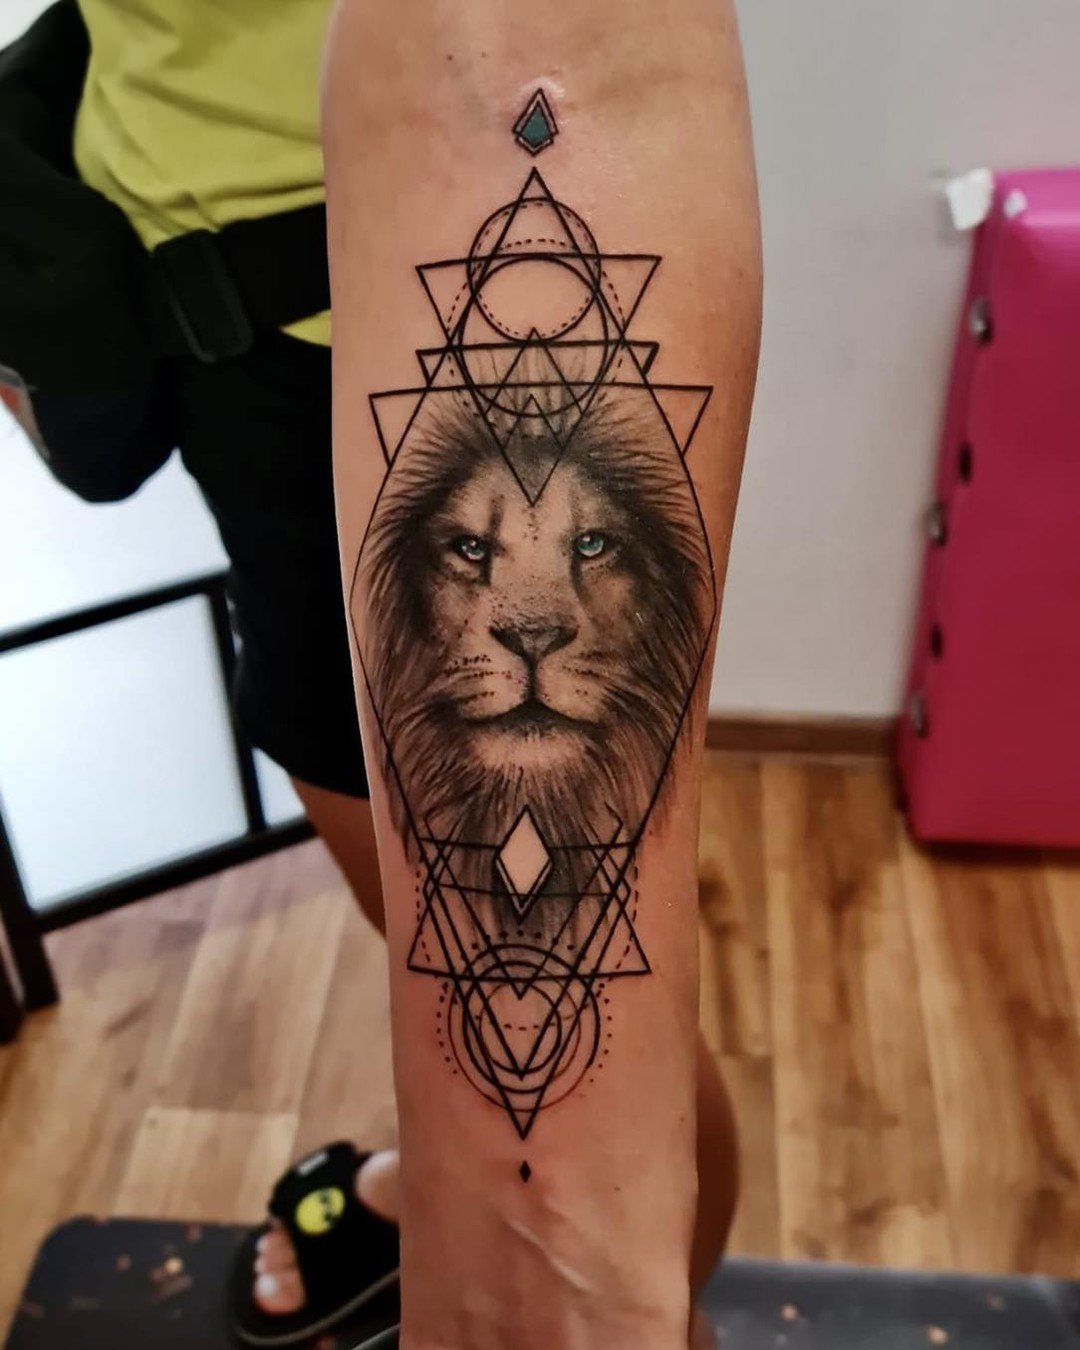 You should have a tattoo of a perfect lion in circles and triangles.